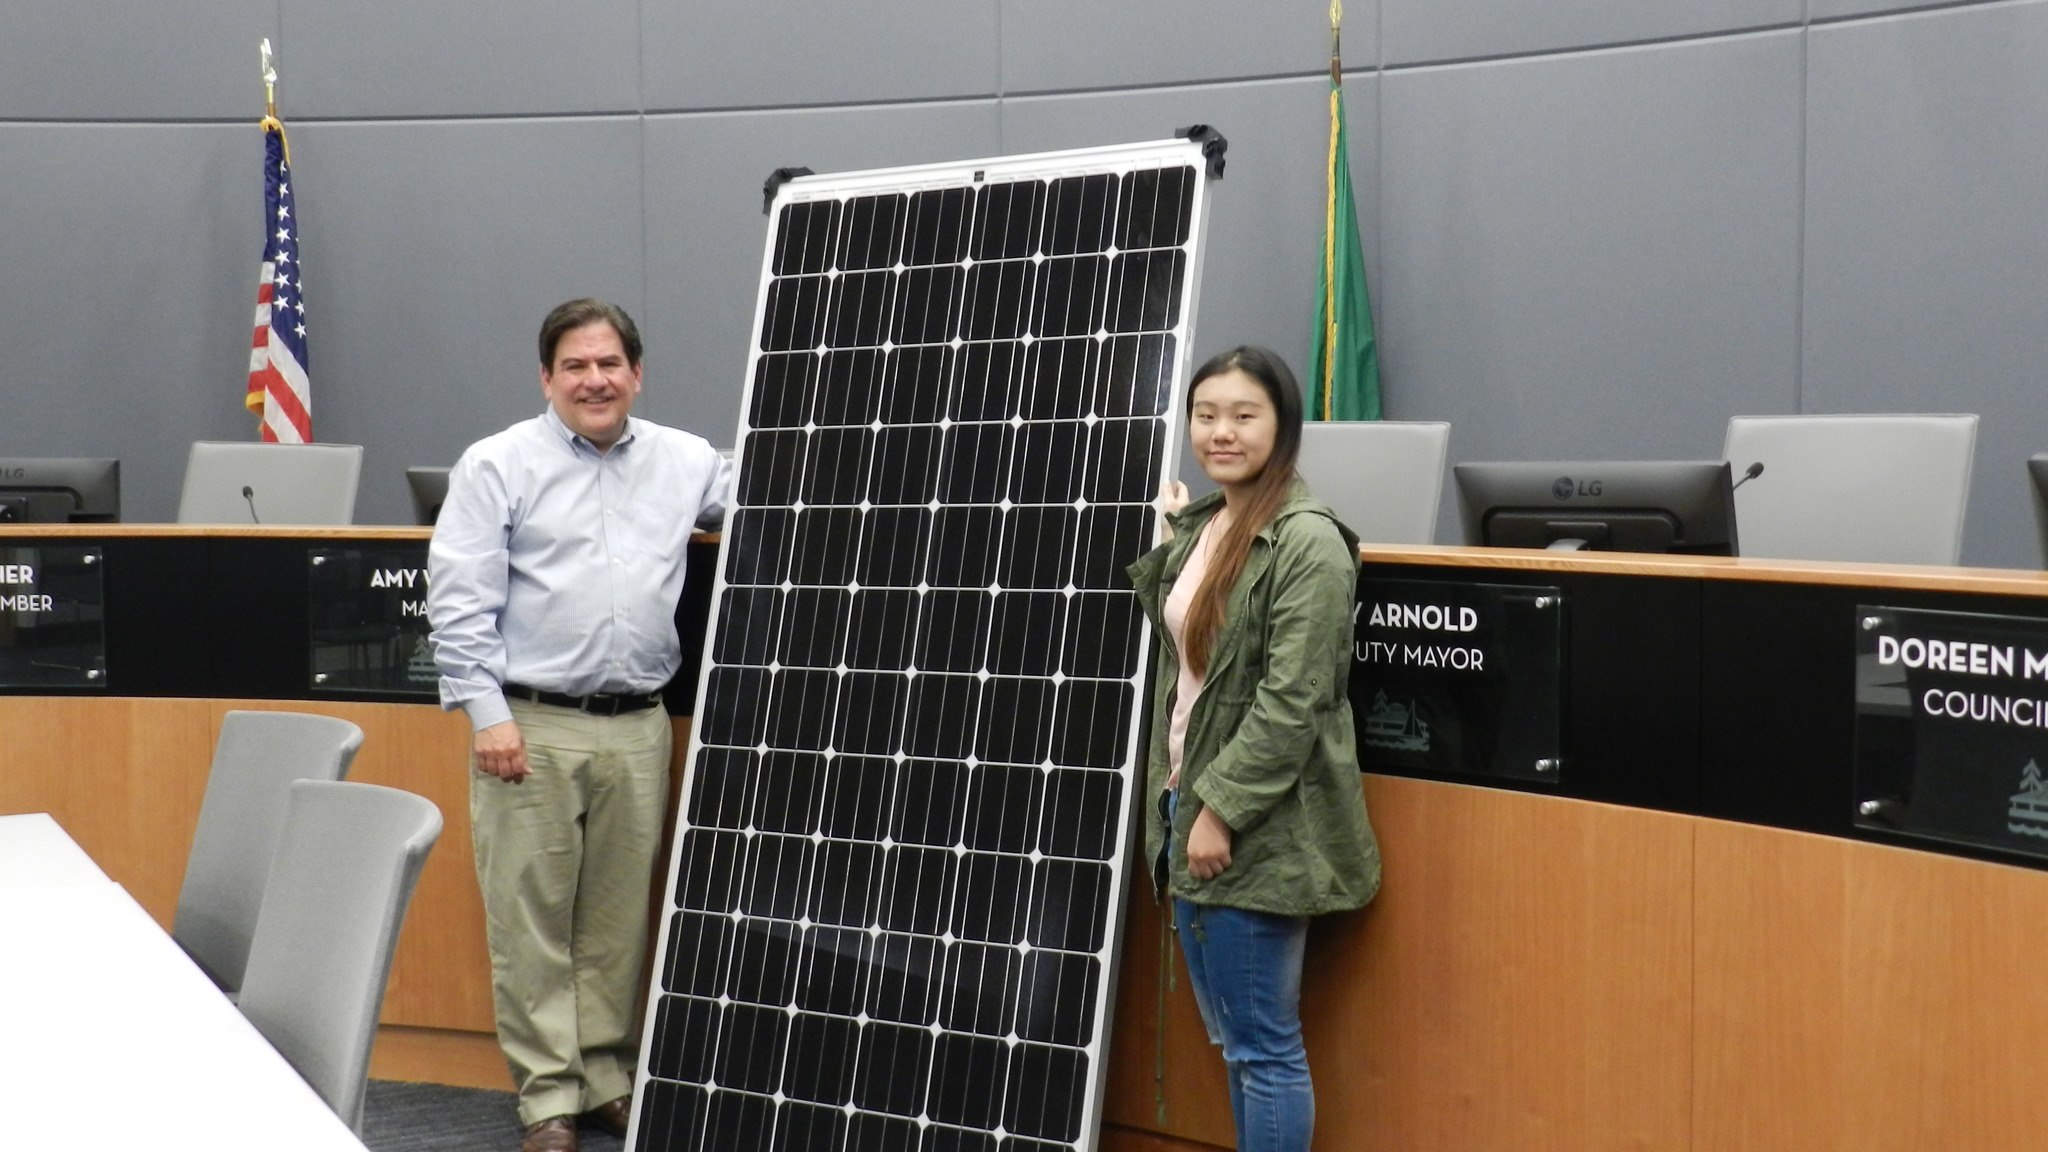 Kirkland Deputy Mayor Jay Arnold and International Community School student Allison Li pose with one of the solar panels to be installed at Kirkland City Hall. Image Credit: City of Kirkland